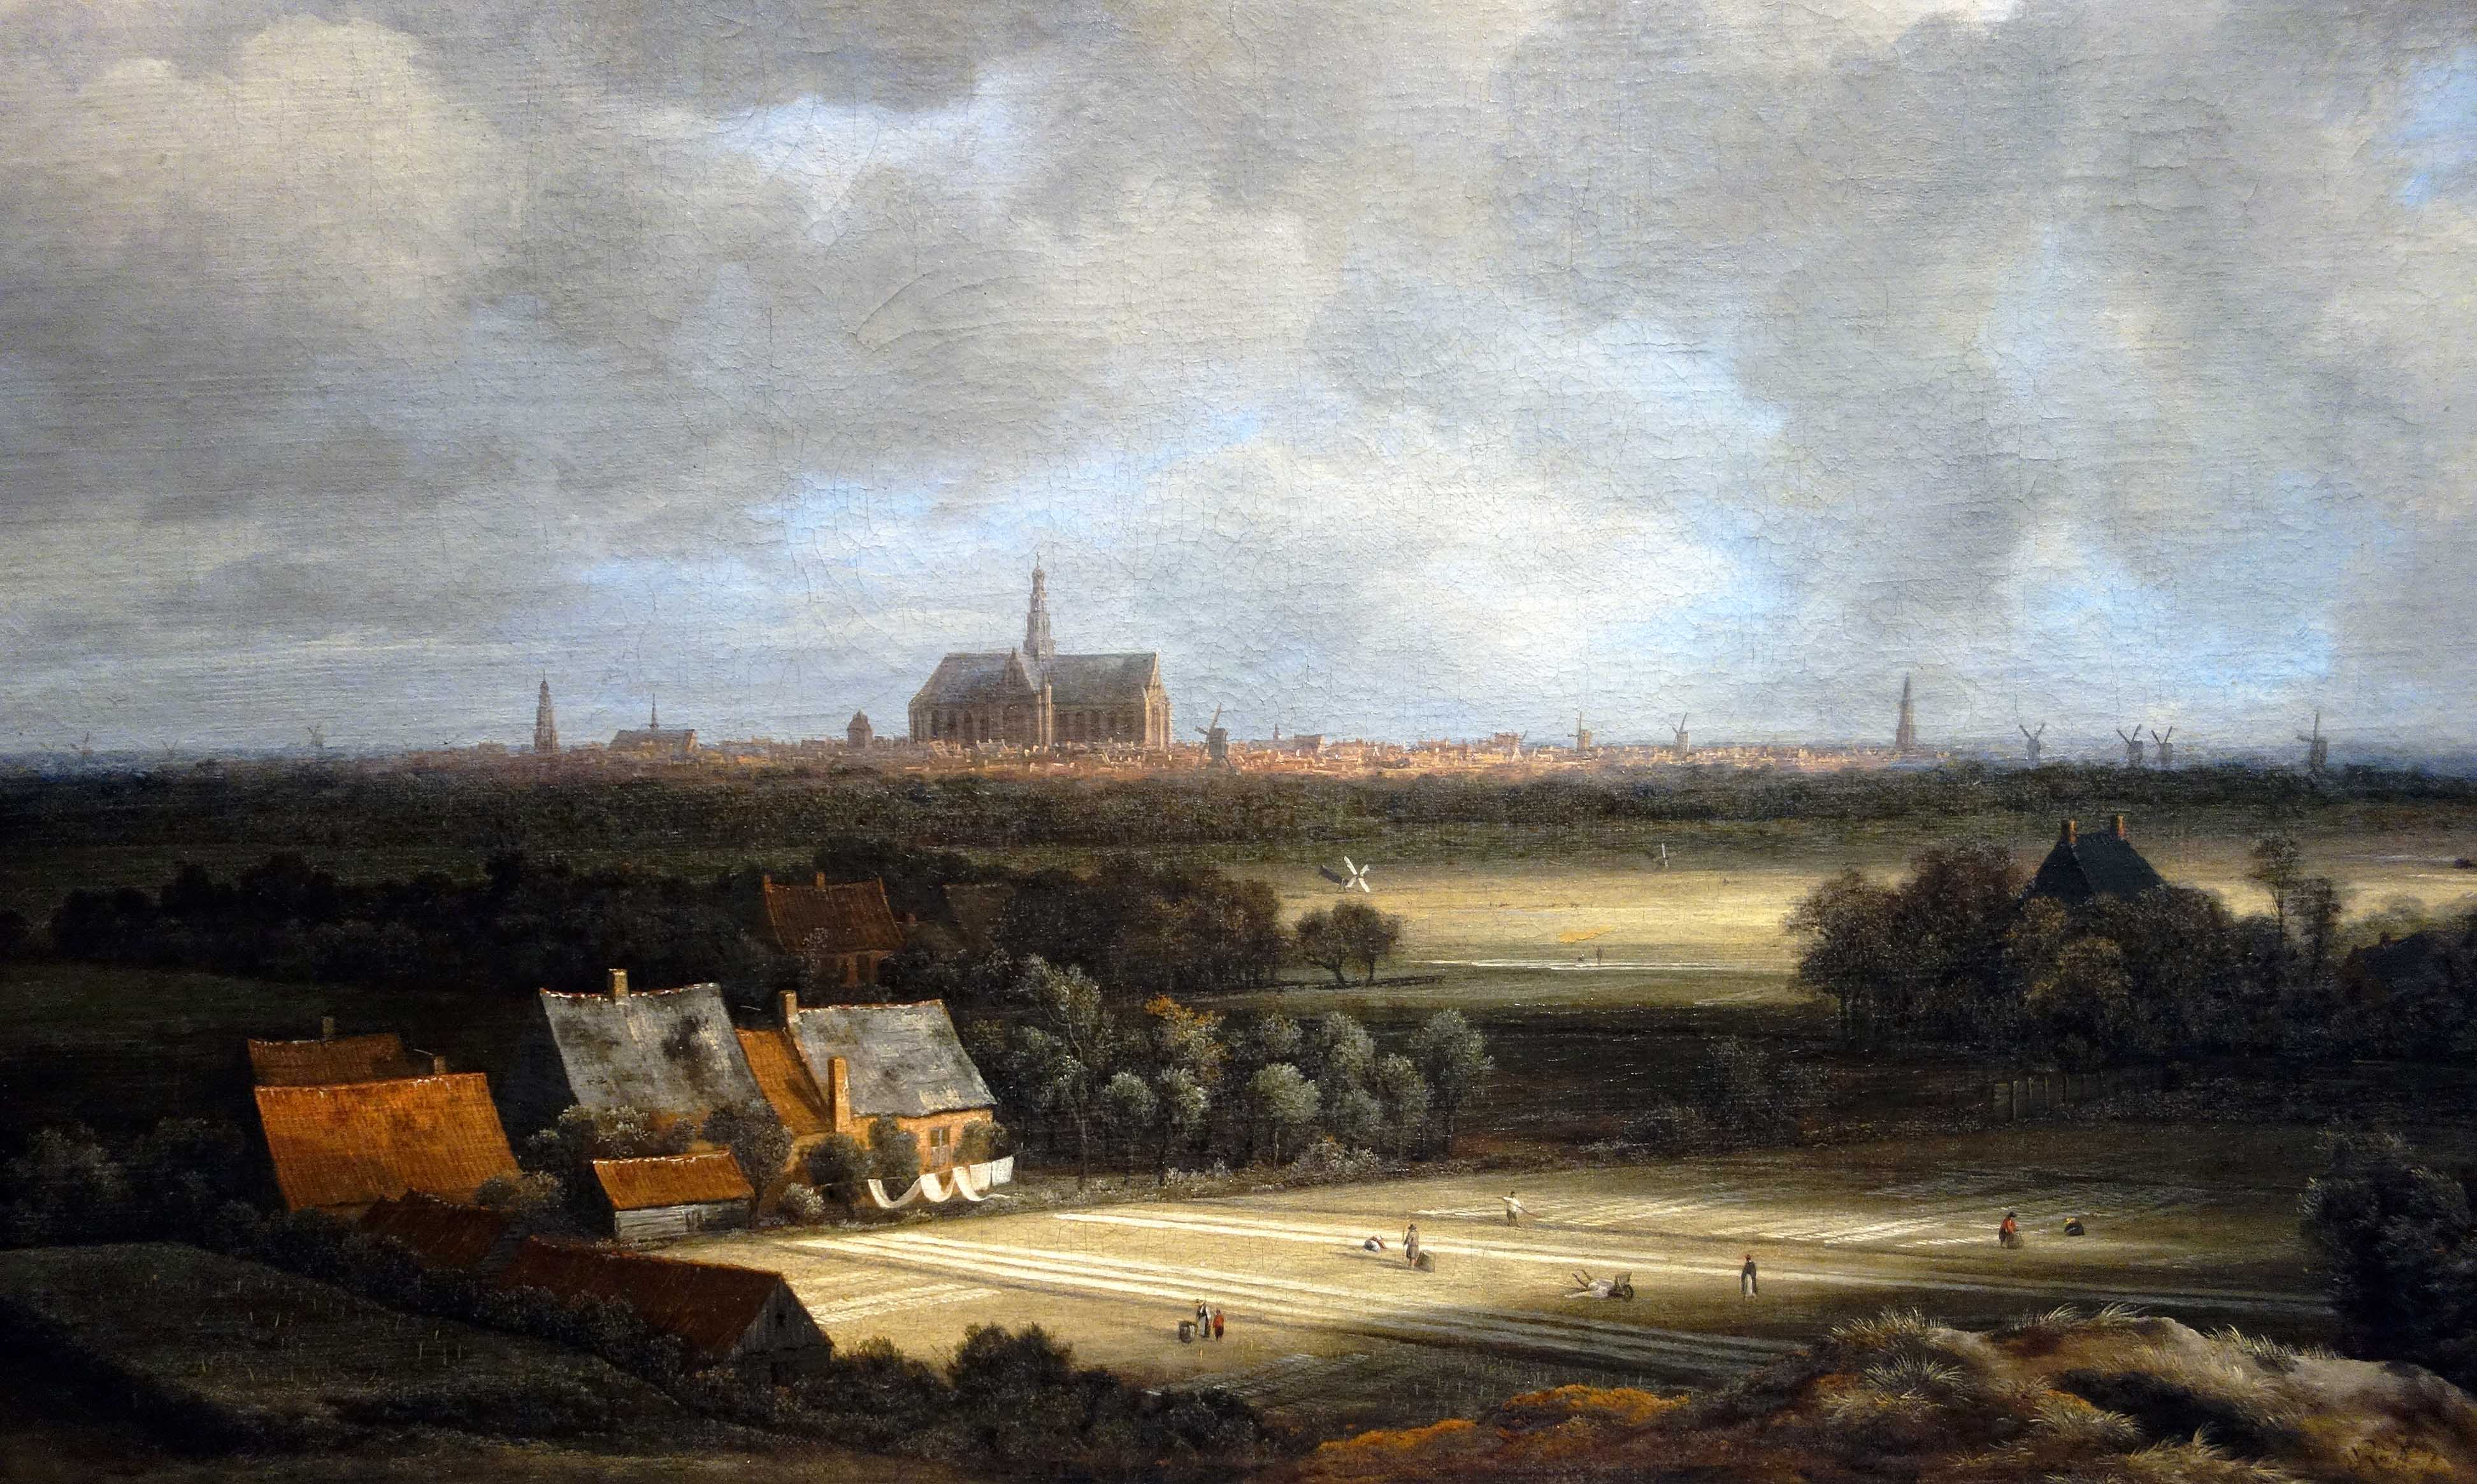 Jacob van Ruisdael, View of Haarlem with Bleaching Grounds, c. 1670–75, oil on canvas, 55.5 x 62 cm (Mauritshuis, The Hague)